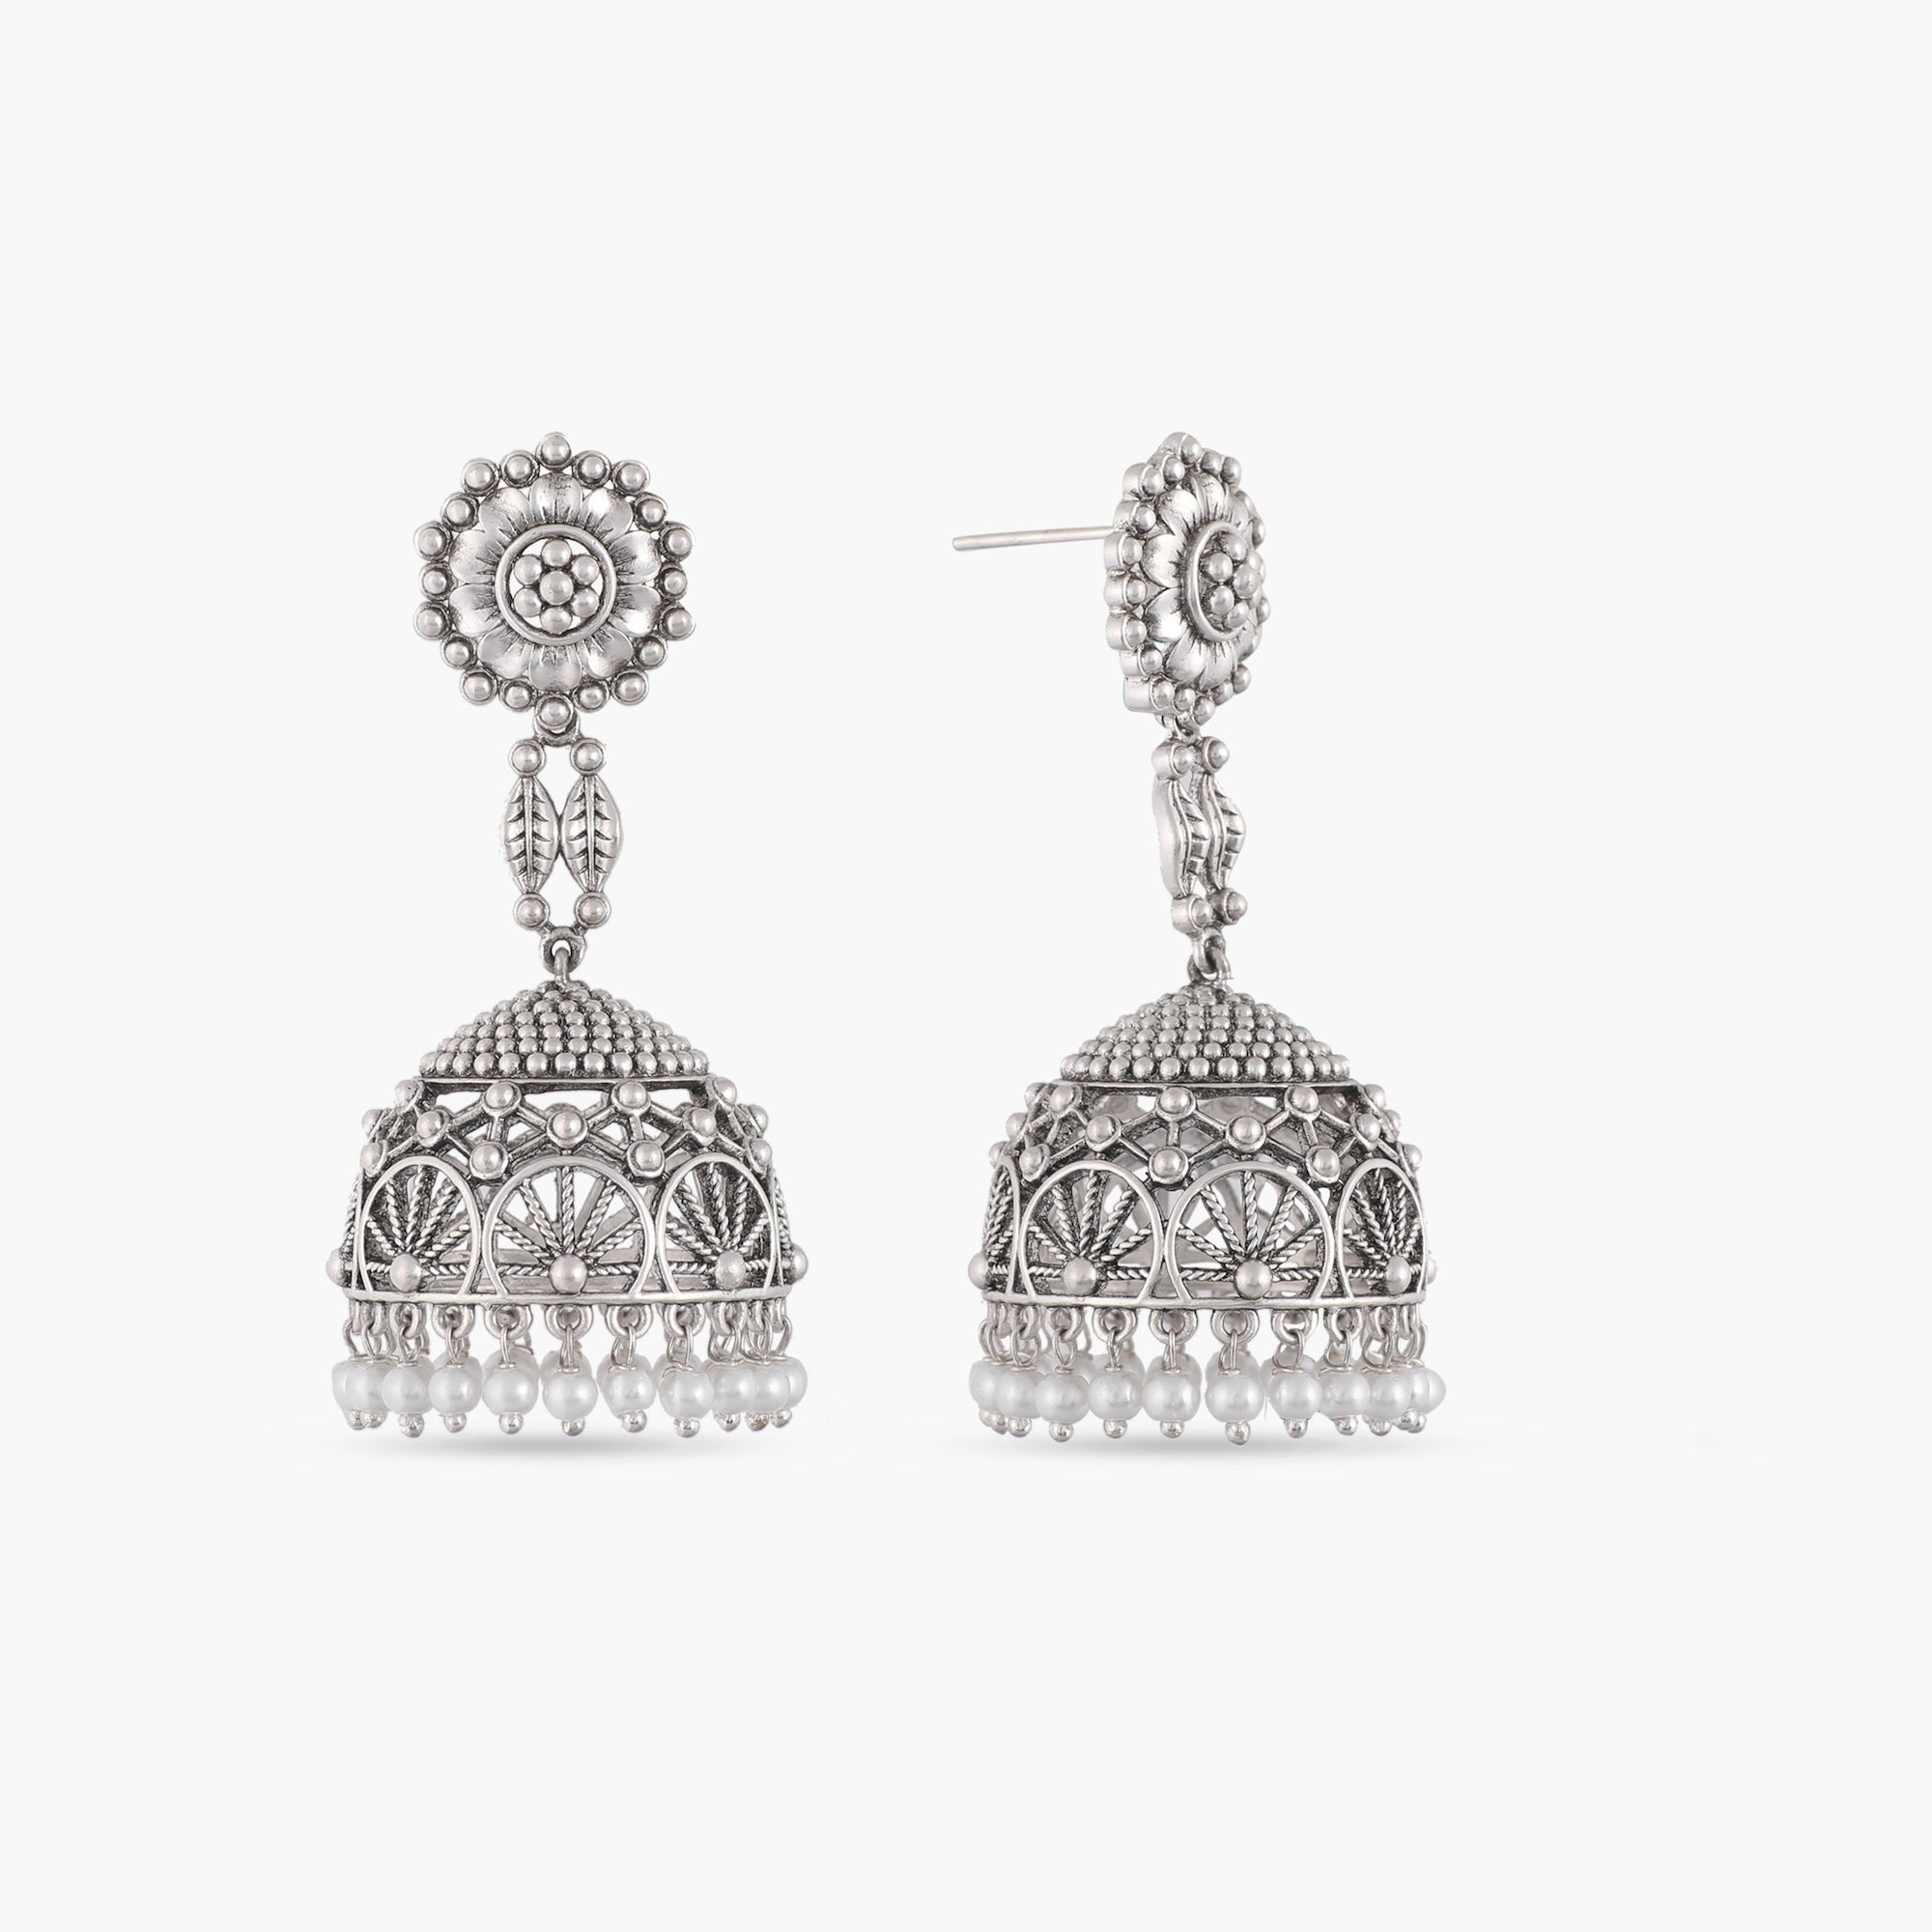 Update more than 178 silver jhumka earrings online india latest